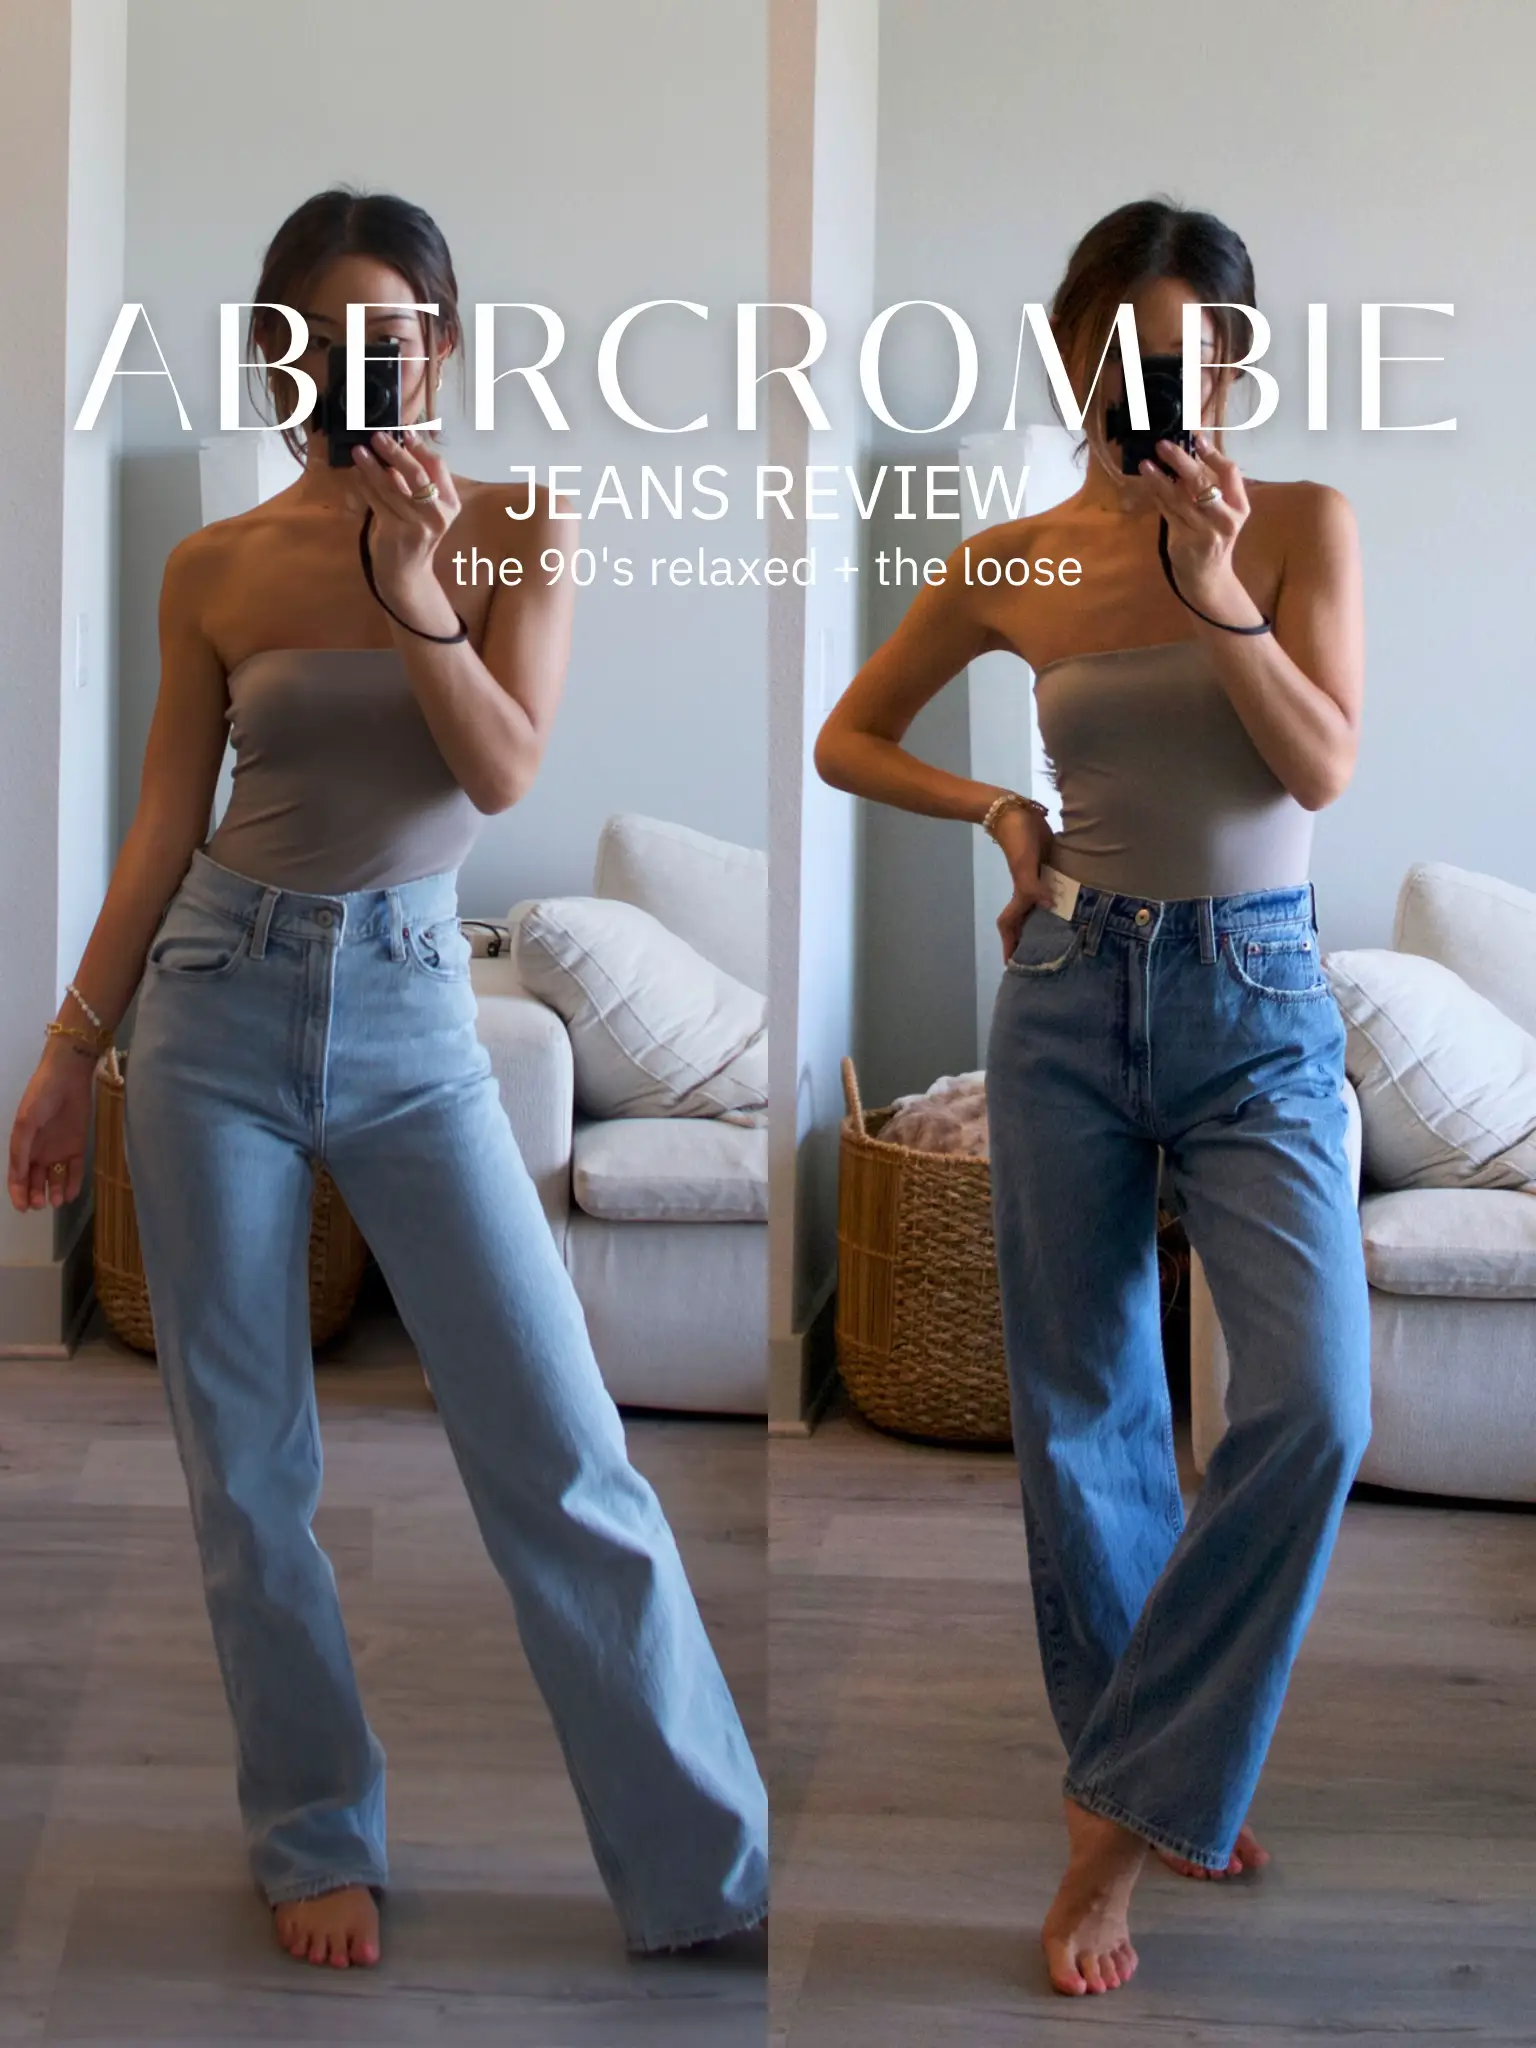 Abercrombie jeans review (obsessed!), Gallery posted by stephanie tran